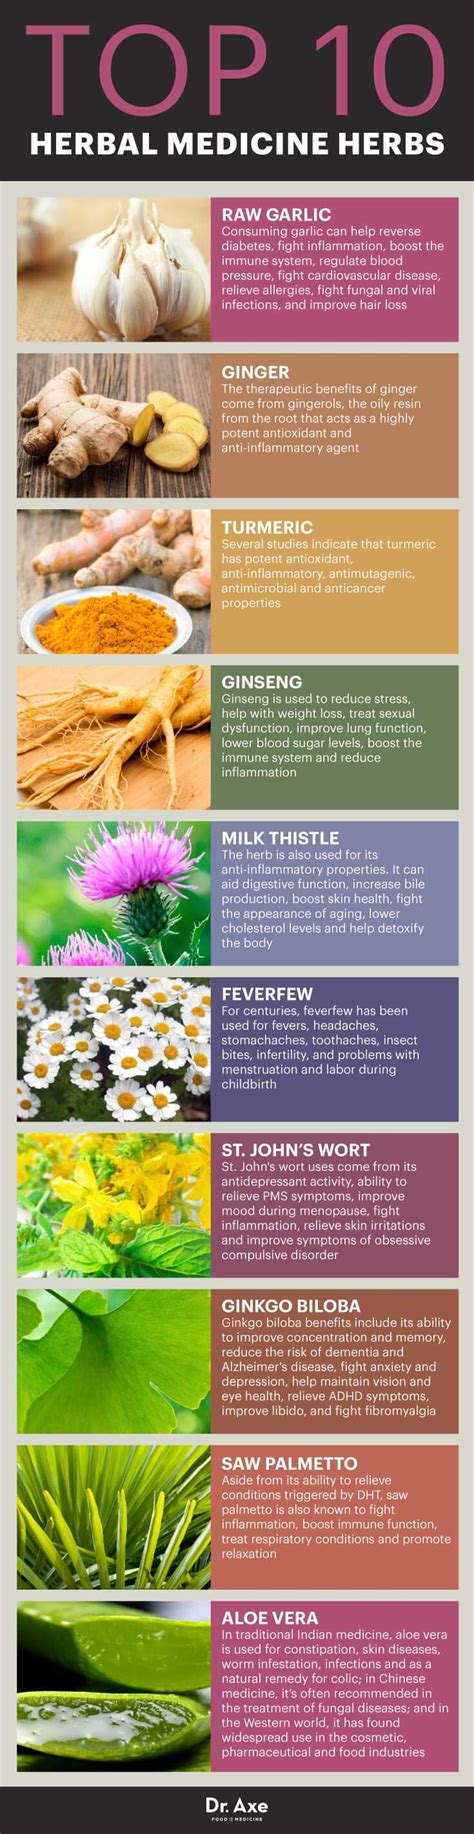 guideline on quality of herbal medicinal